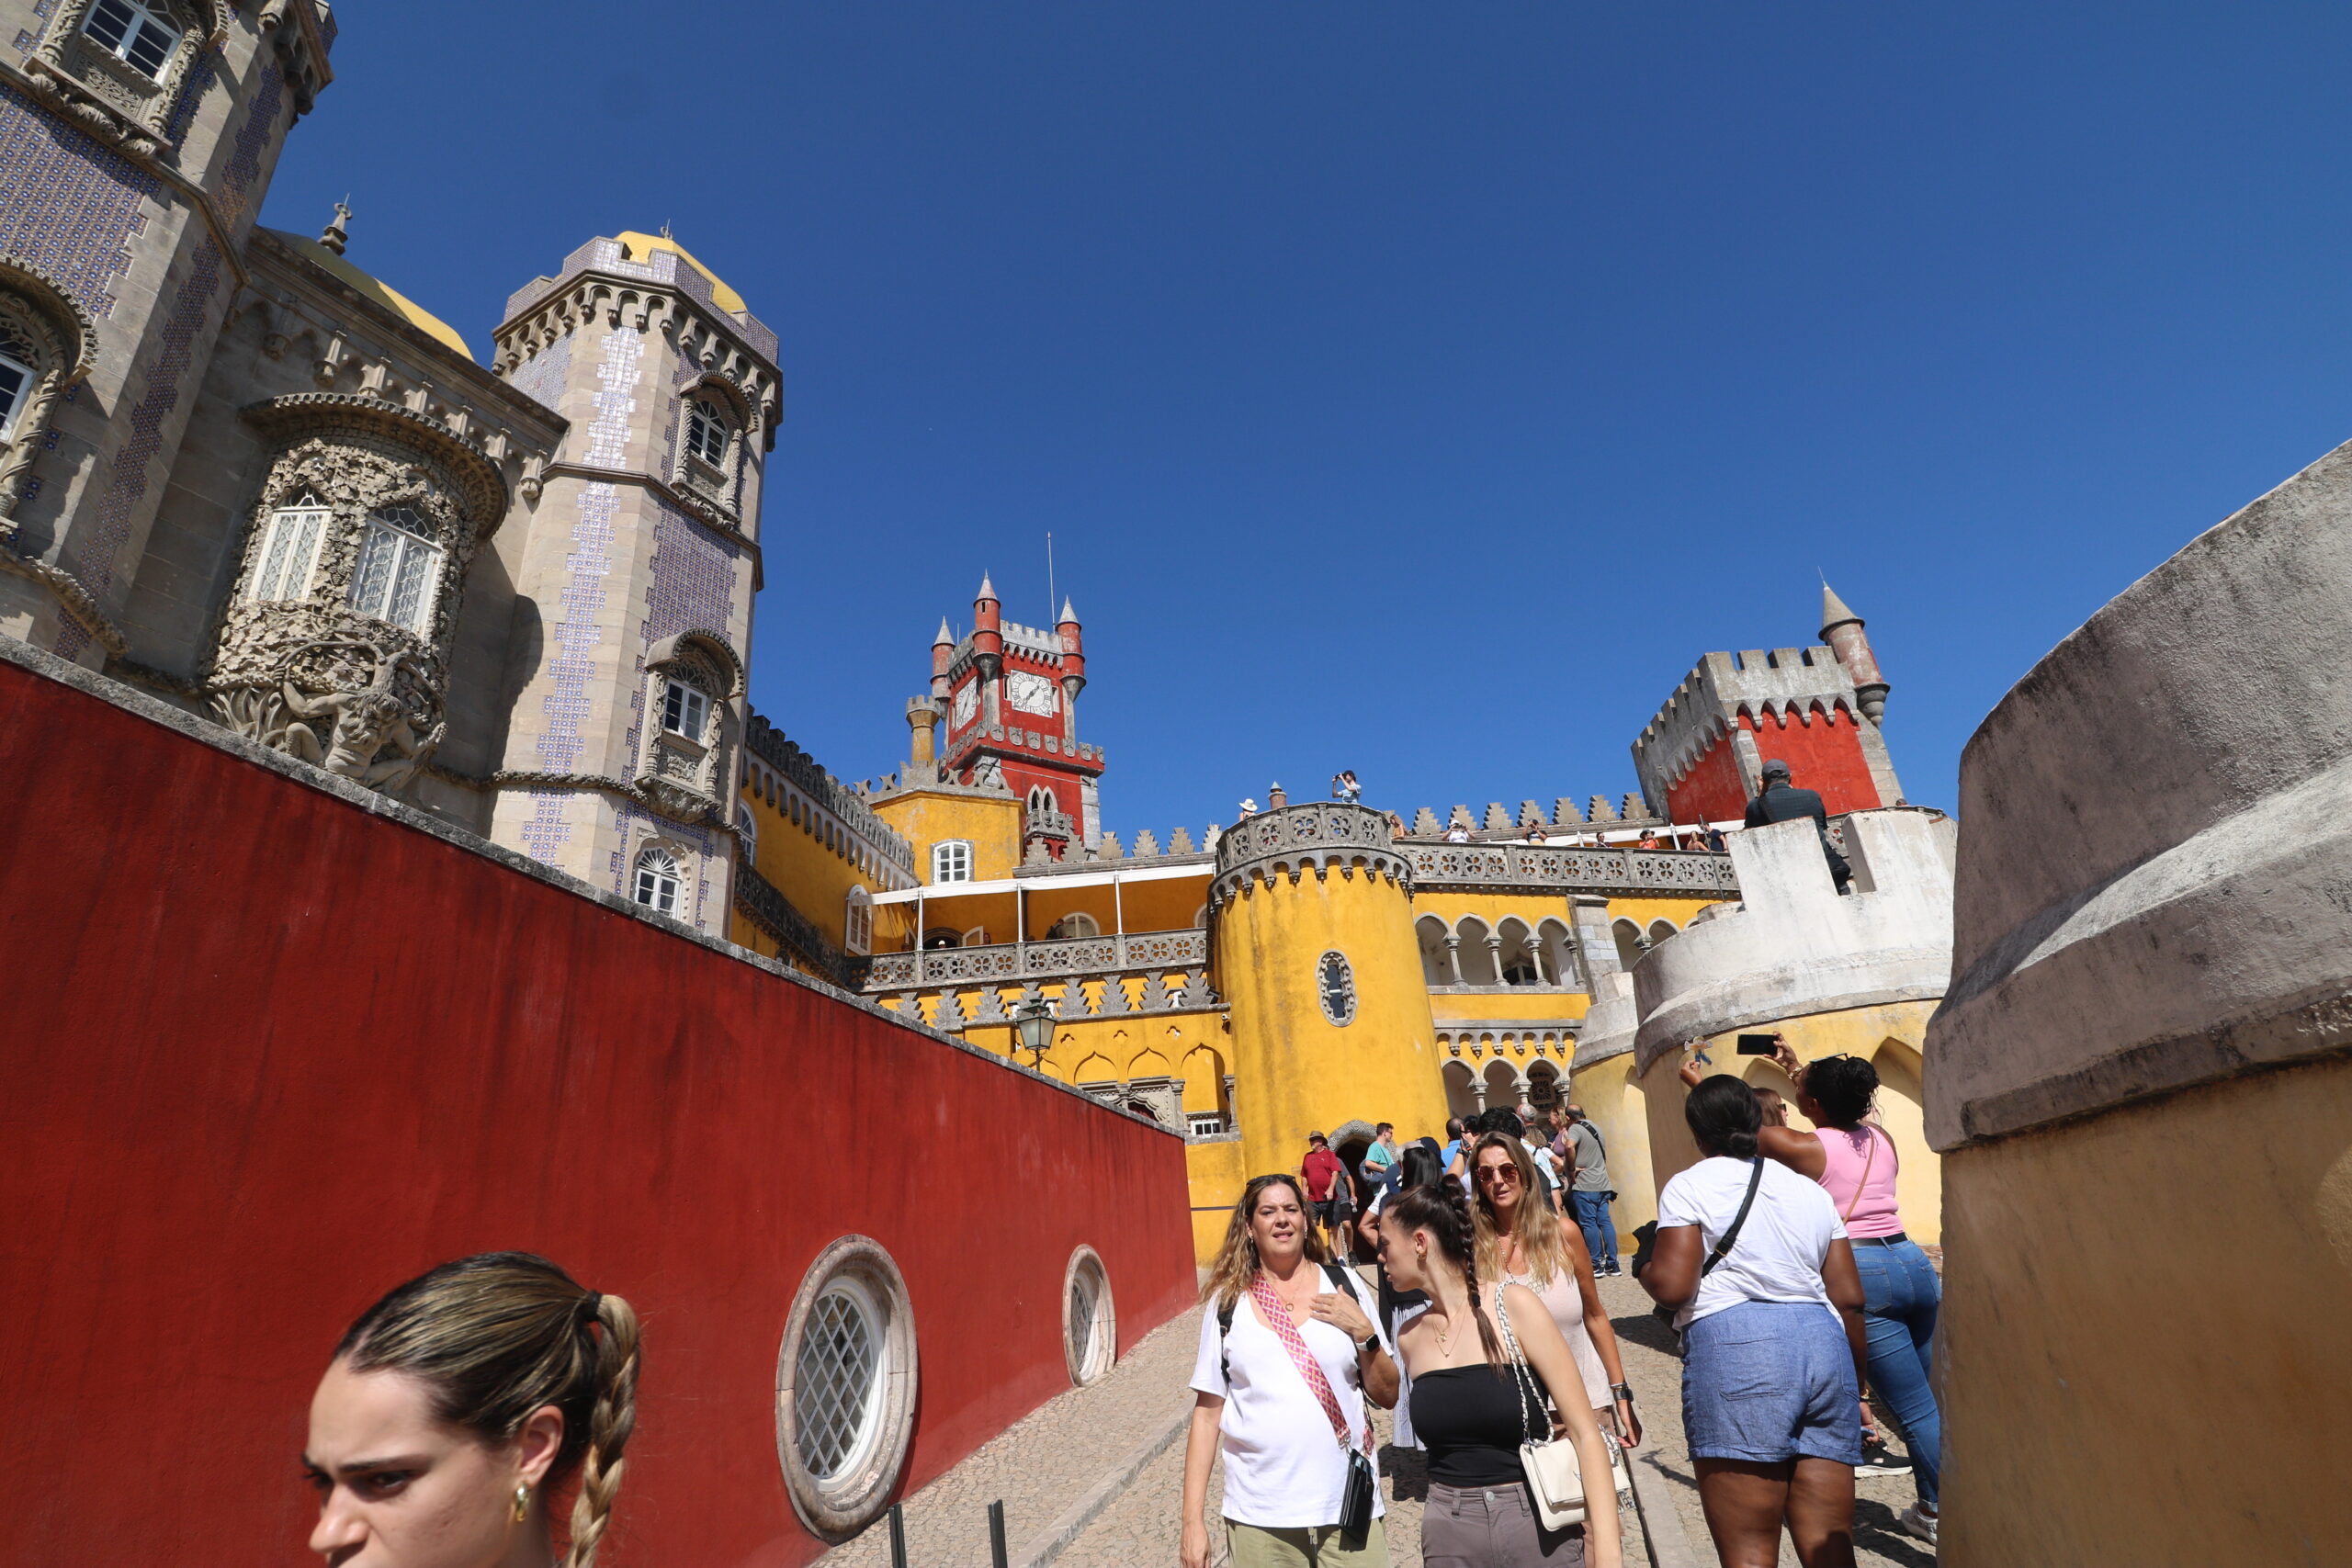 Sintra's magic doesn't end with the Pena Palace